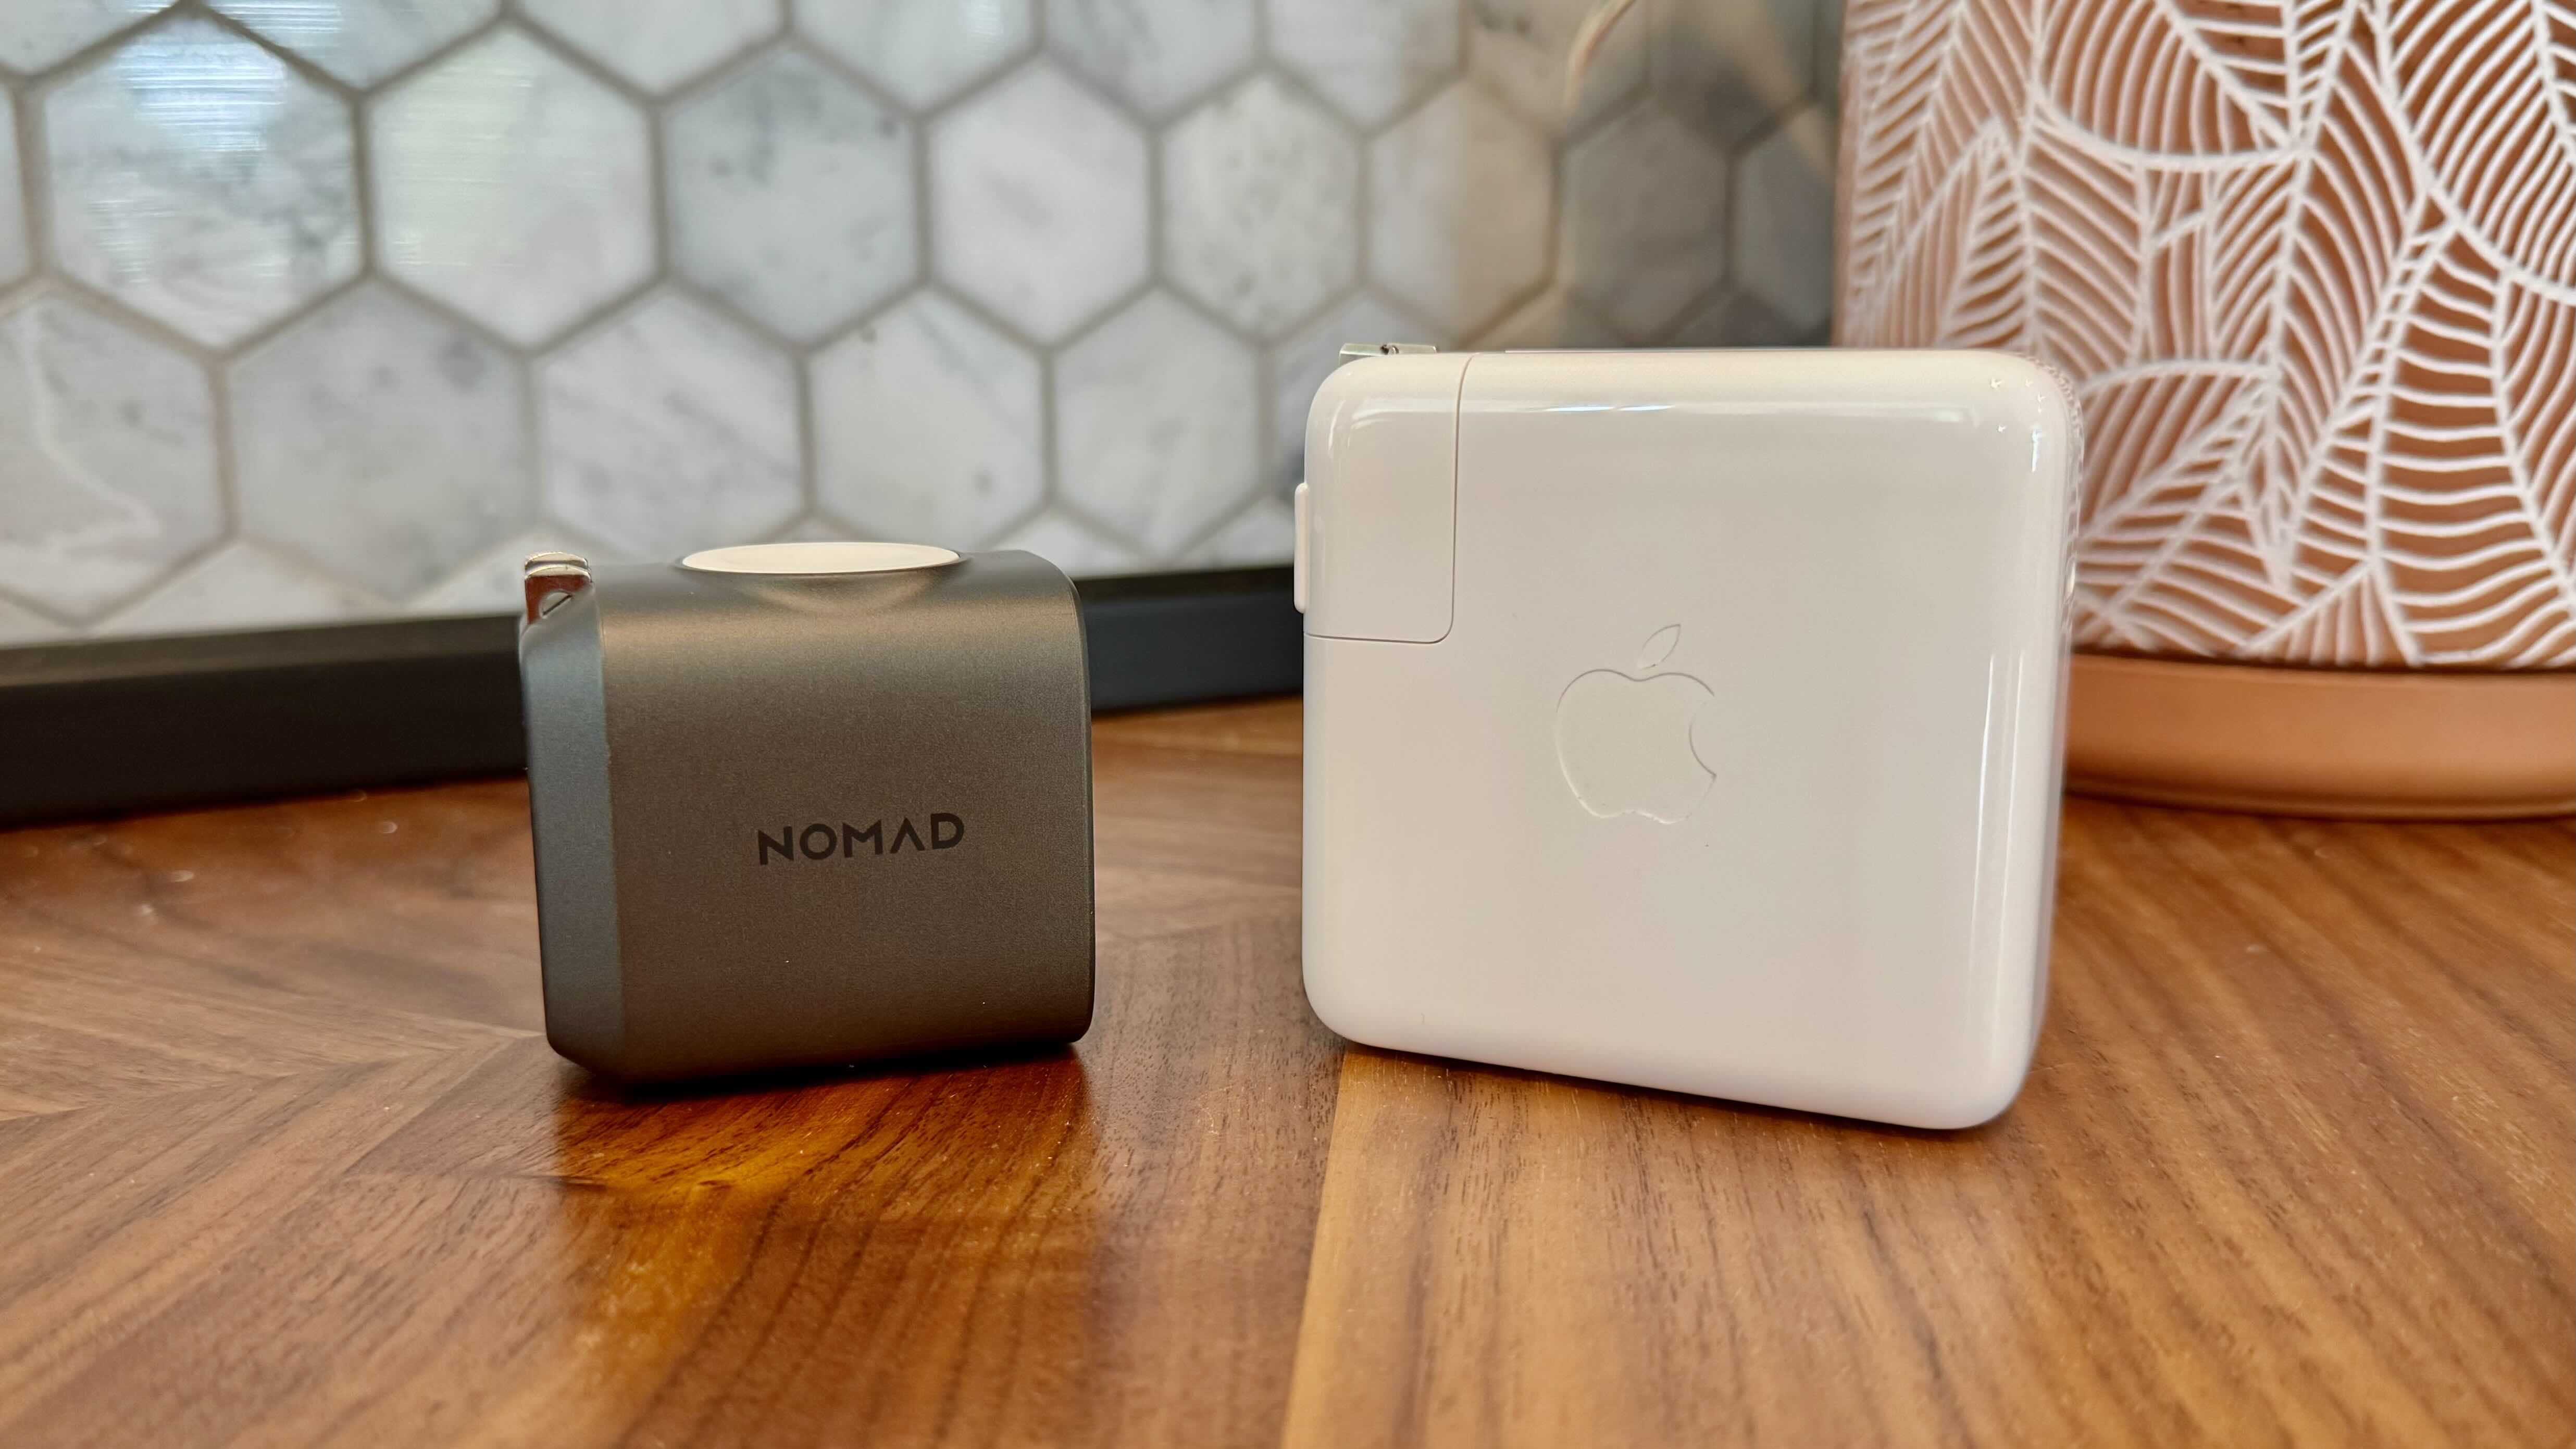 Nomad 65W Power Adapter Apple Watch Edition vs Apple Charger